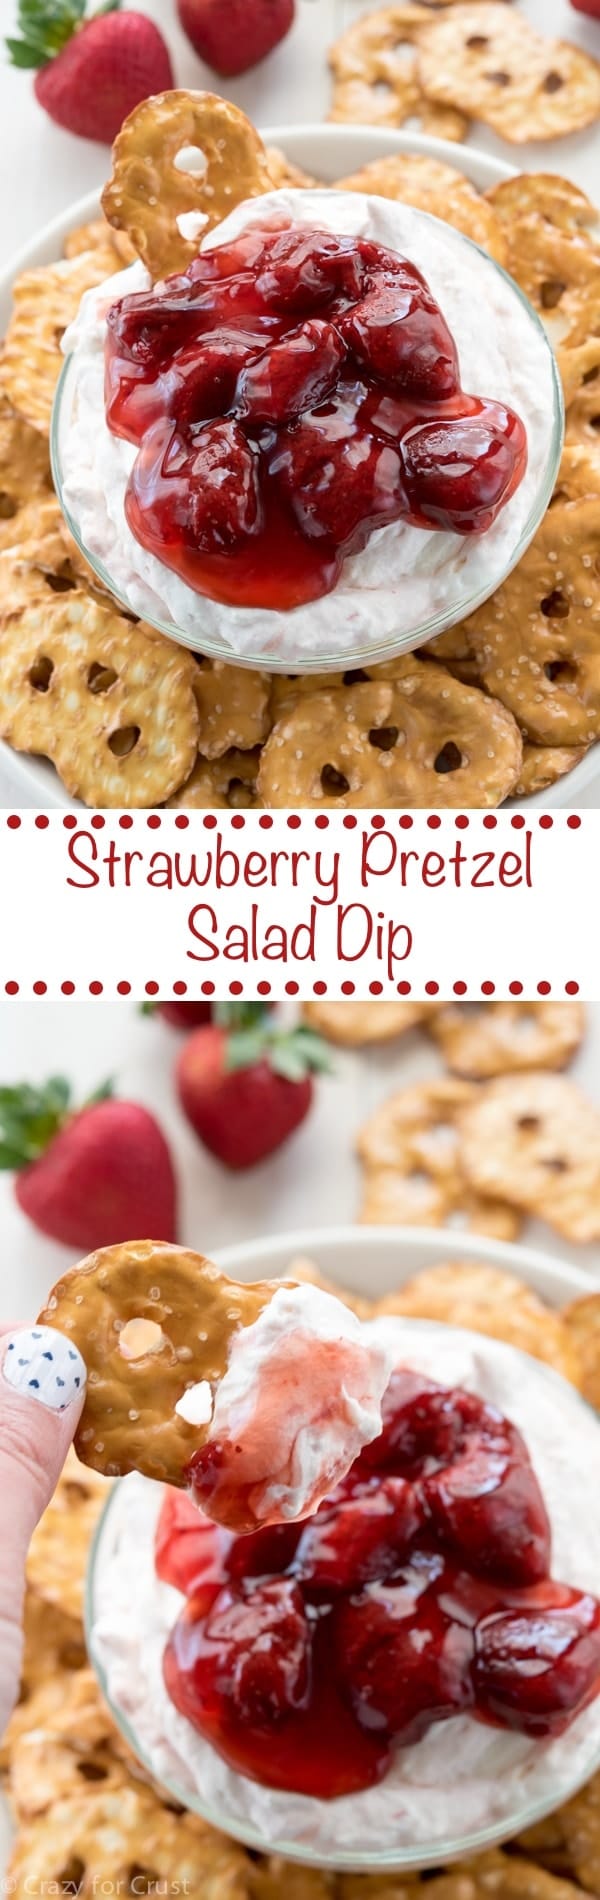 Strawberry Pretzel Salad Dip with a pretzel dipping into it collage